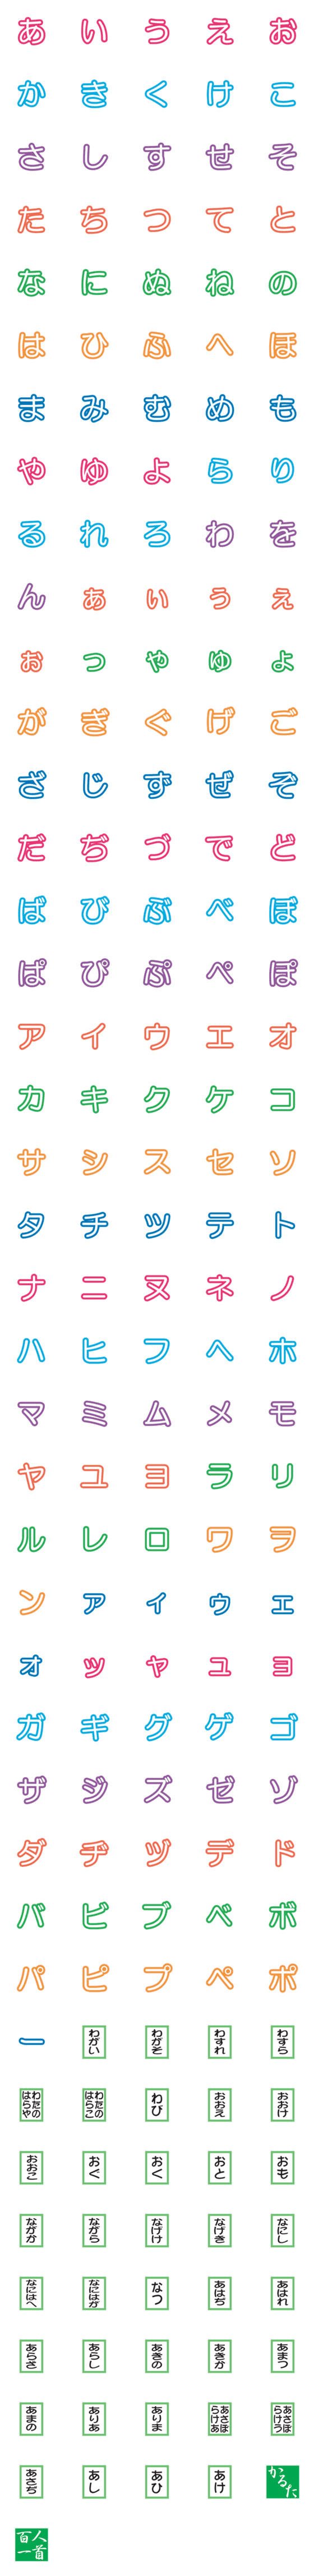 [LINE絵文字]競技かるた絵文字④の画像一覧